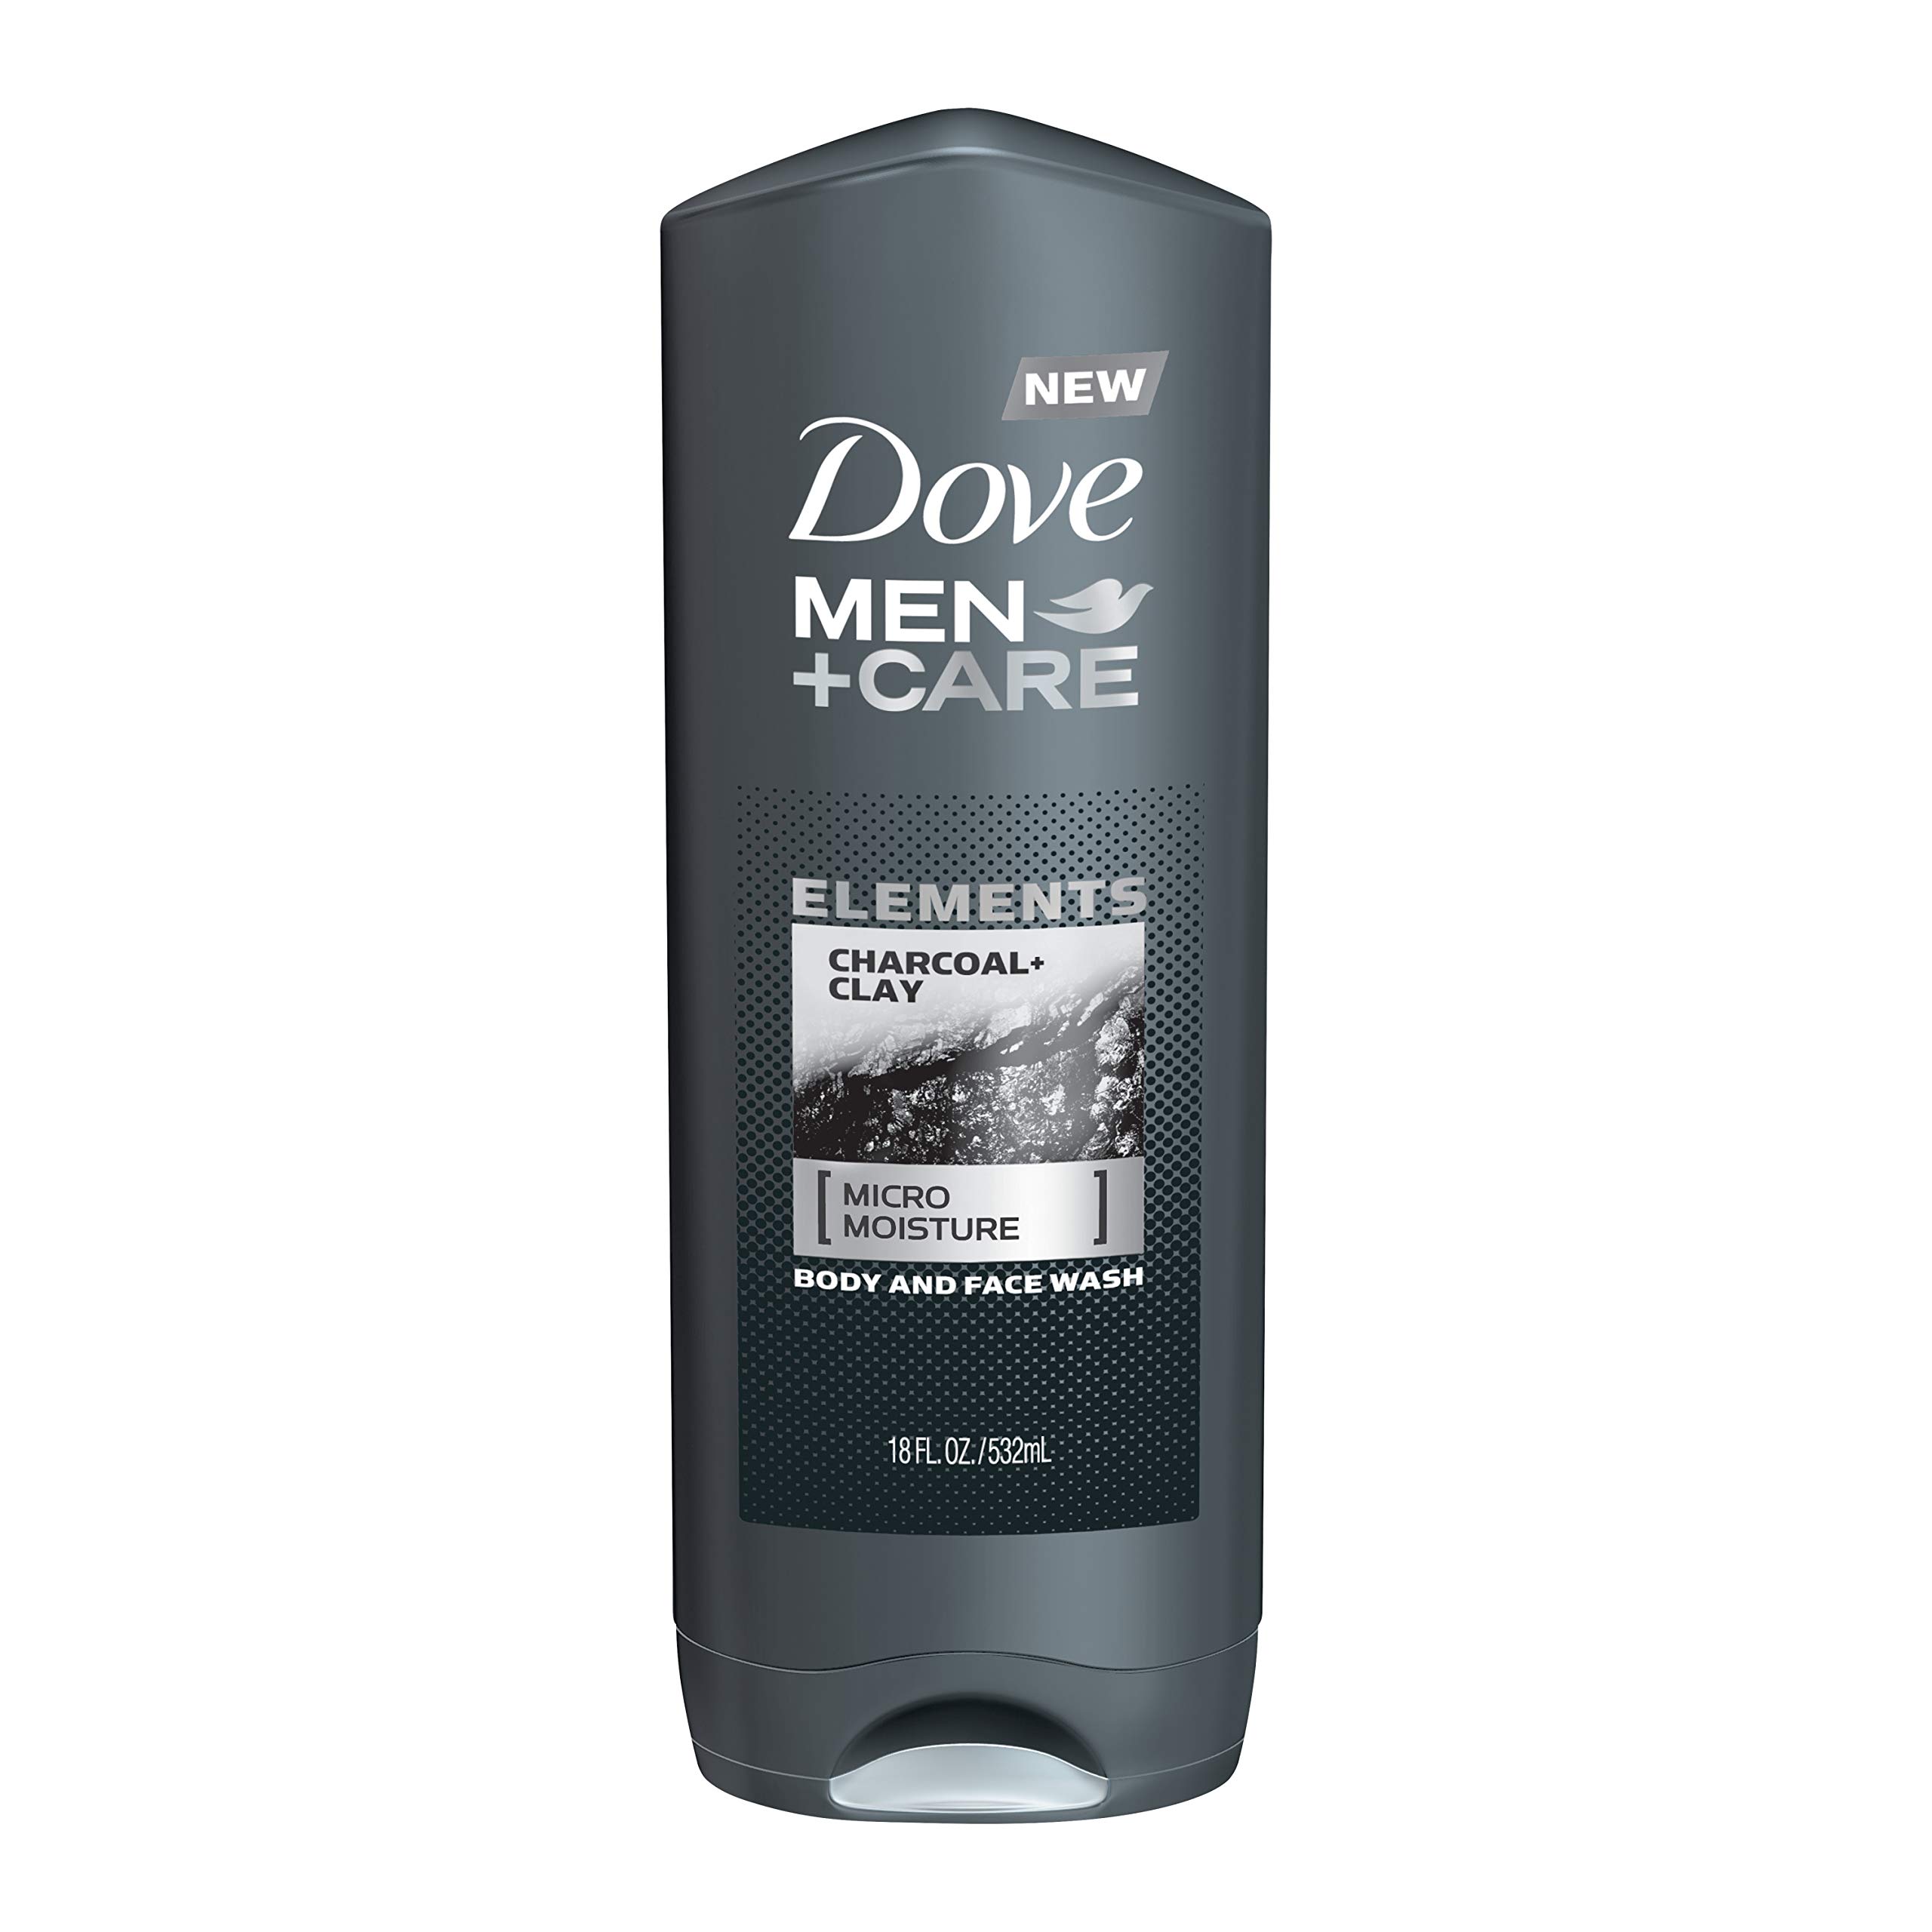 DOVE MEN + CARE Elements Body Wash Charcoal + Clay, Effectively Washes Away Bacteria While Nourishing Your Skin, Gray, 18 Fl Oz (Pack of 4)